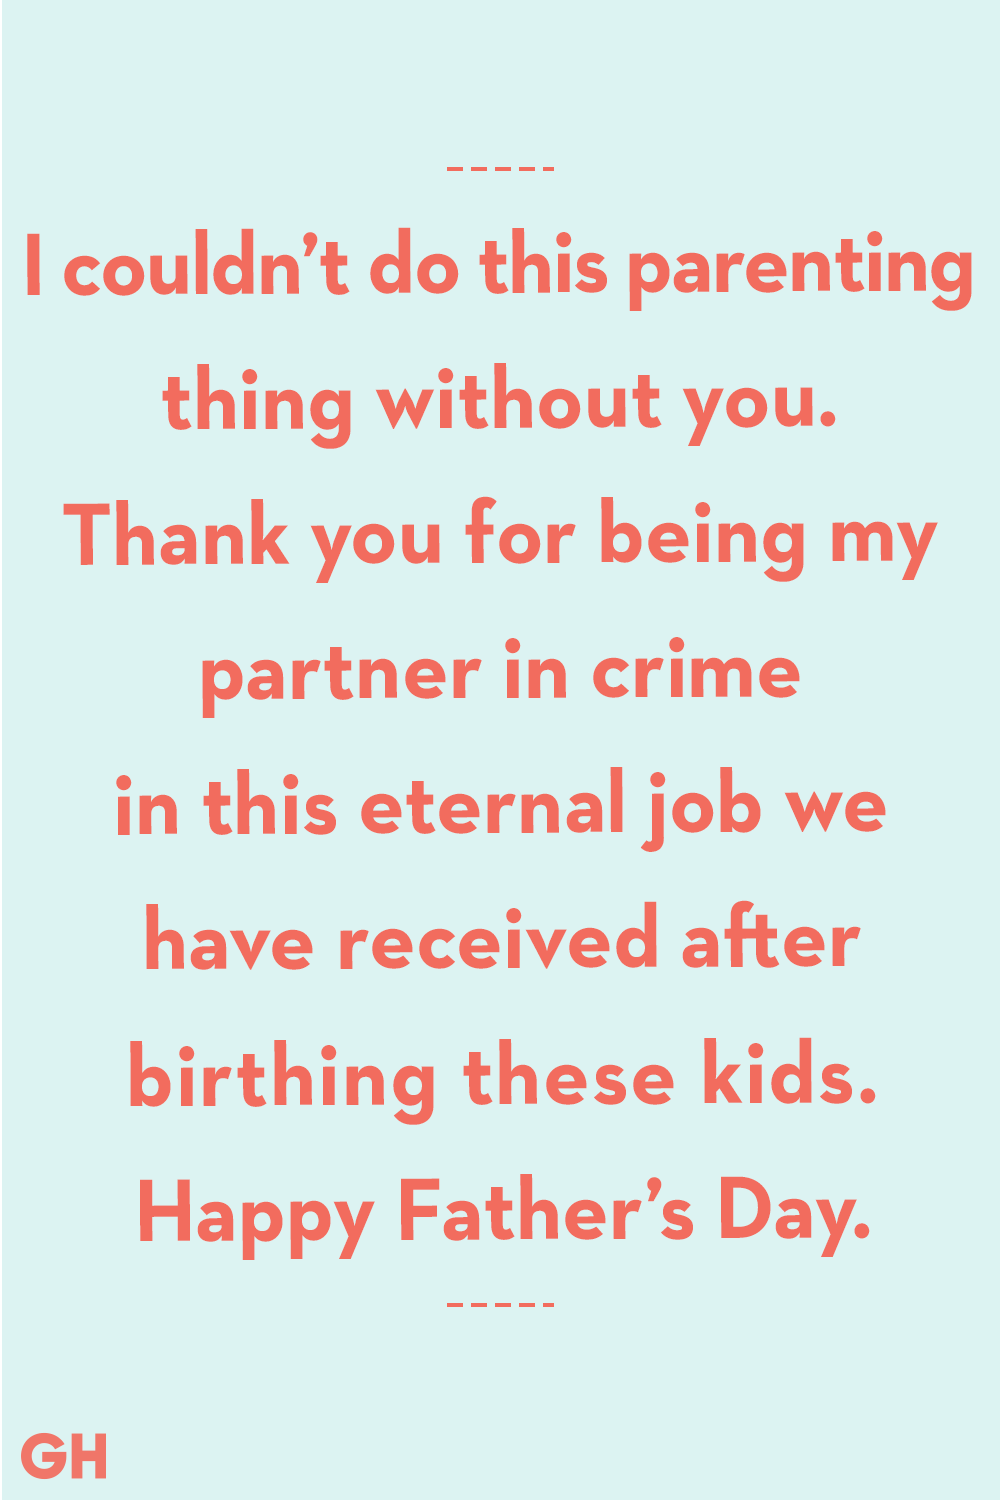 Wife Message To Husband On Father’S Day